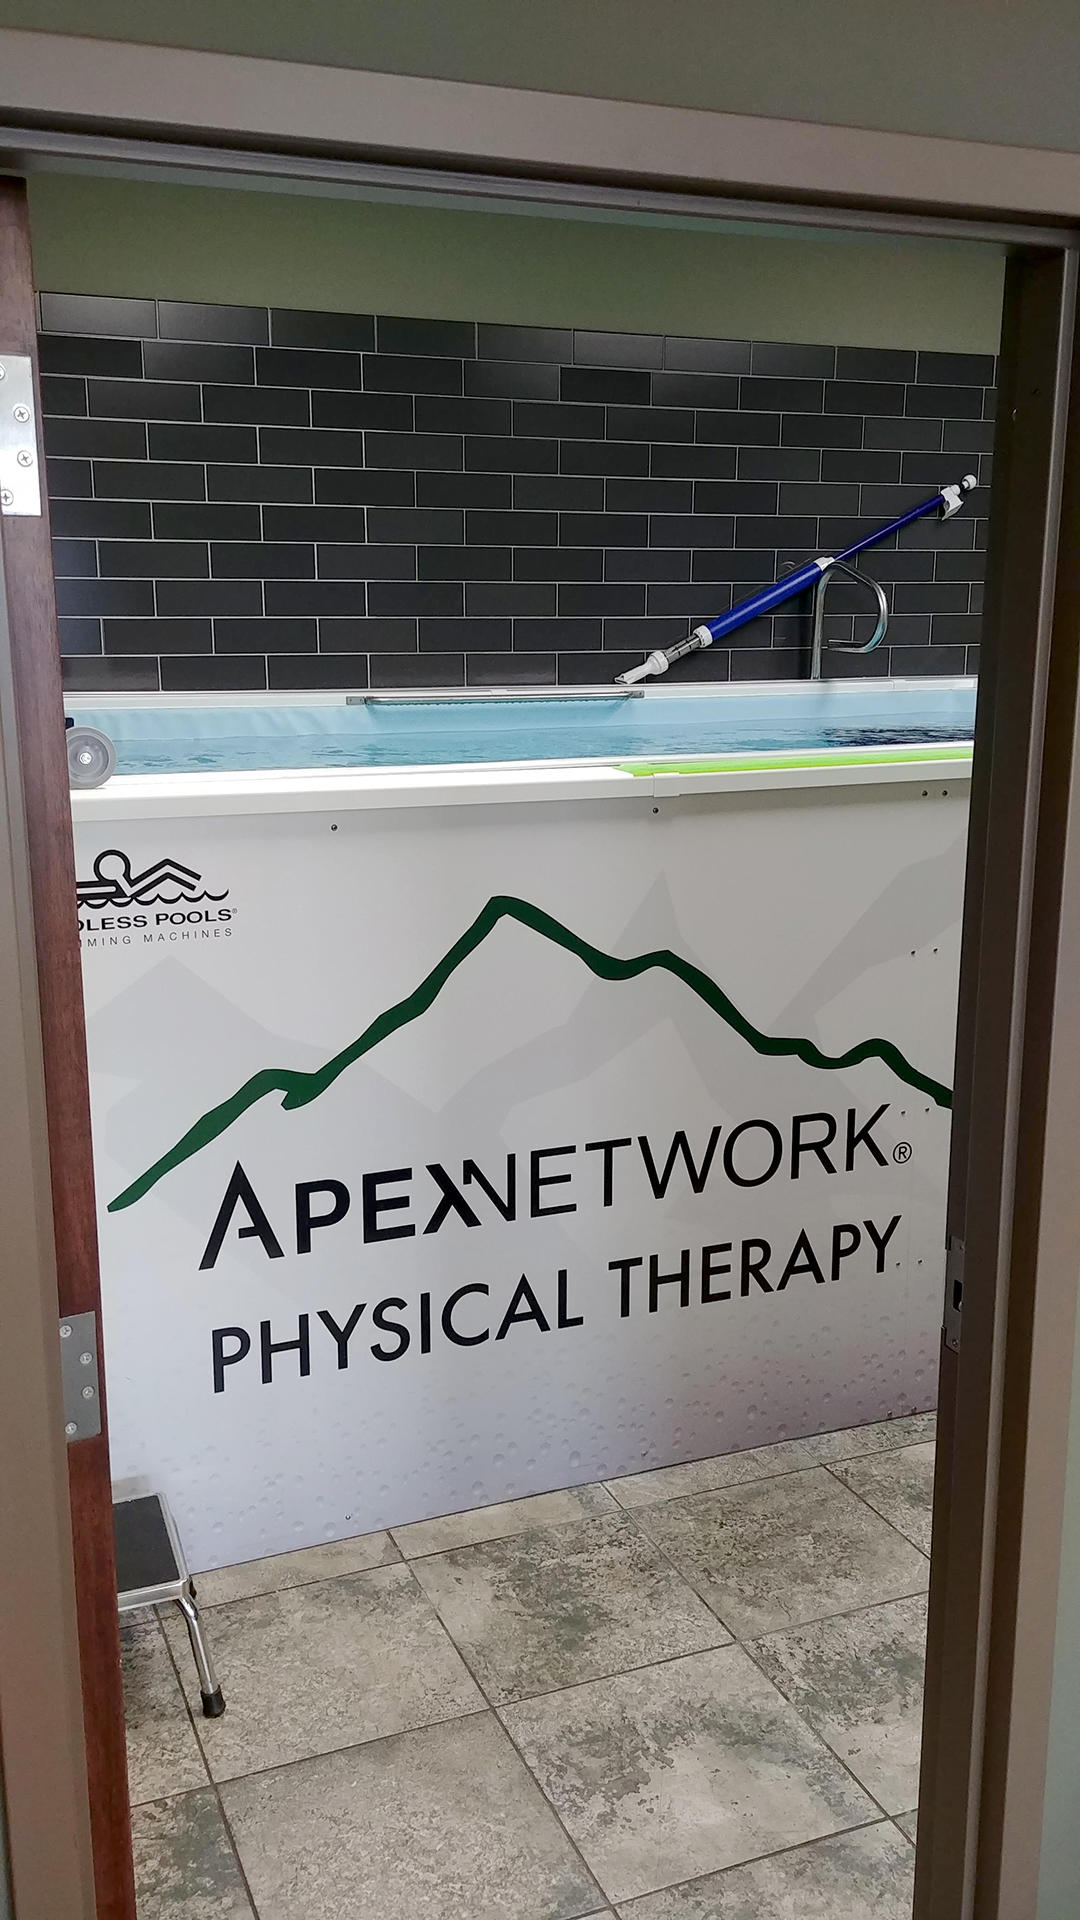 ApexNetwork Physical Therapy 7873 Town Square Ave, Dardenne Prairie Missouri 63368